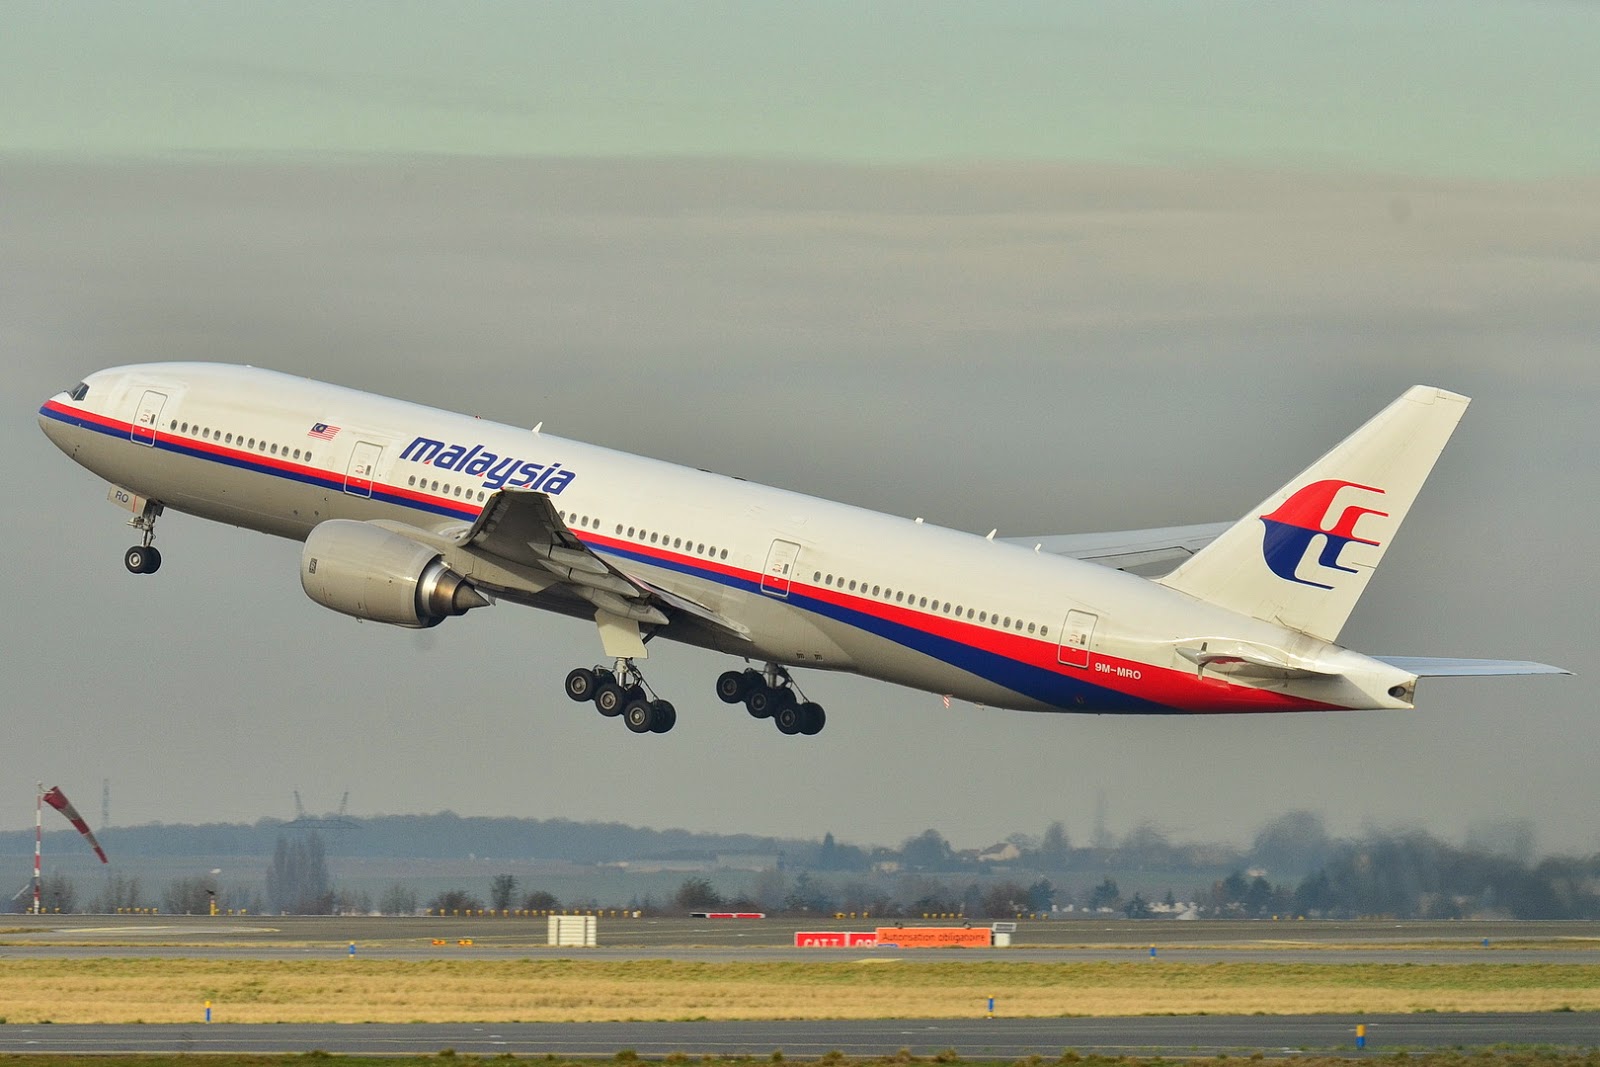 Malaysia Airlines Flight 370 (MH370/MAS370)